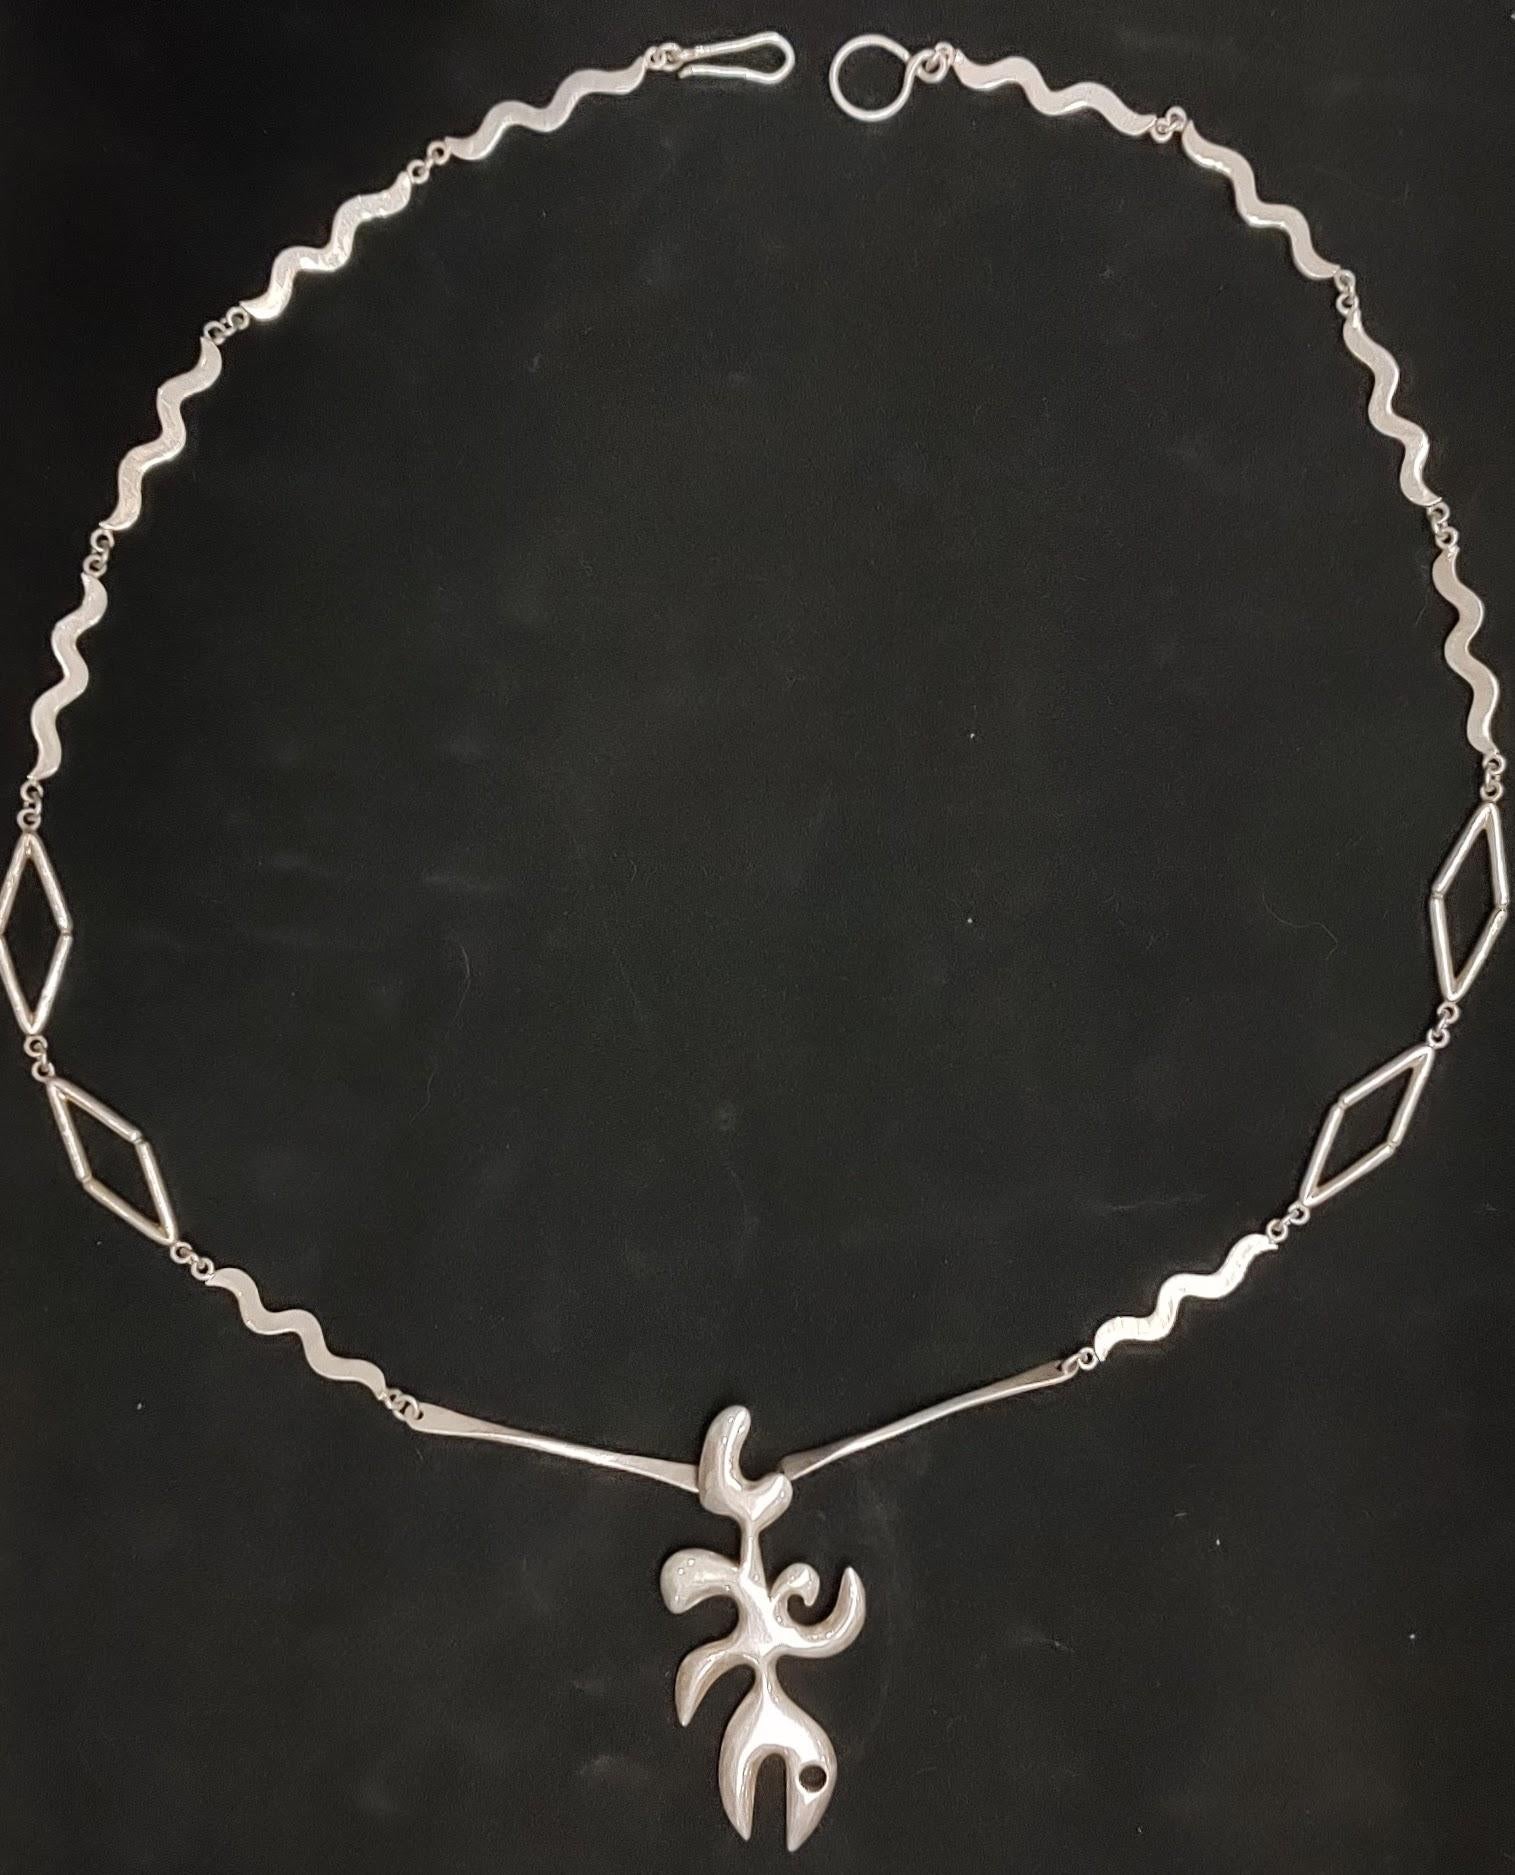 Very rare one-of-a-kind jewelry piece designed by the famous Mexican artist Alfredo Zalce ( Mexico 1908-2003), and depicts an abstract fish shape hanging from a very special chain made out of different elements linked together. This talented and